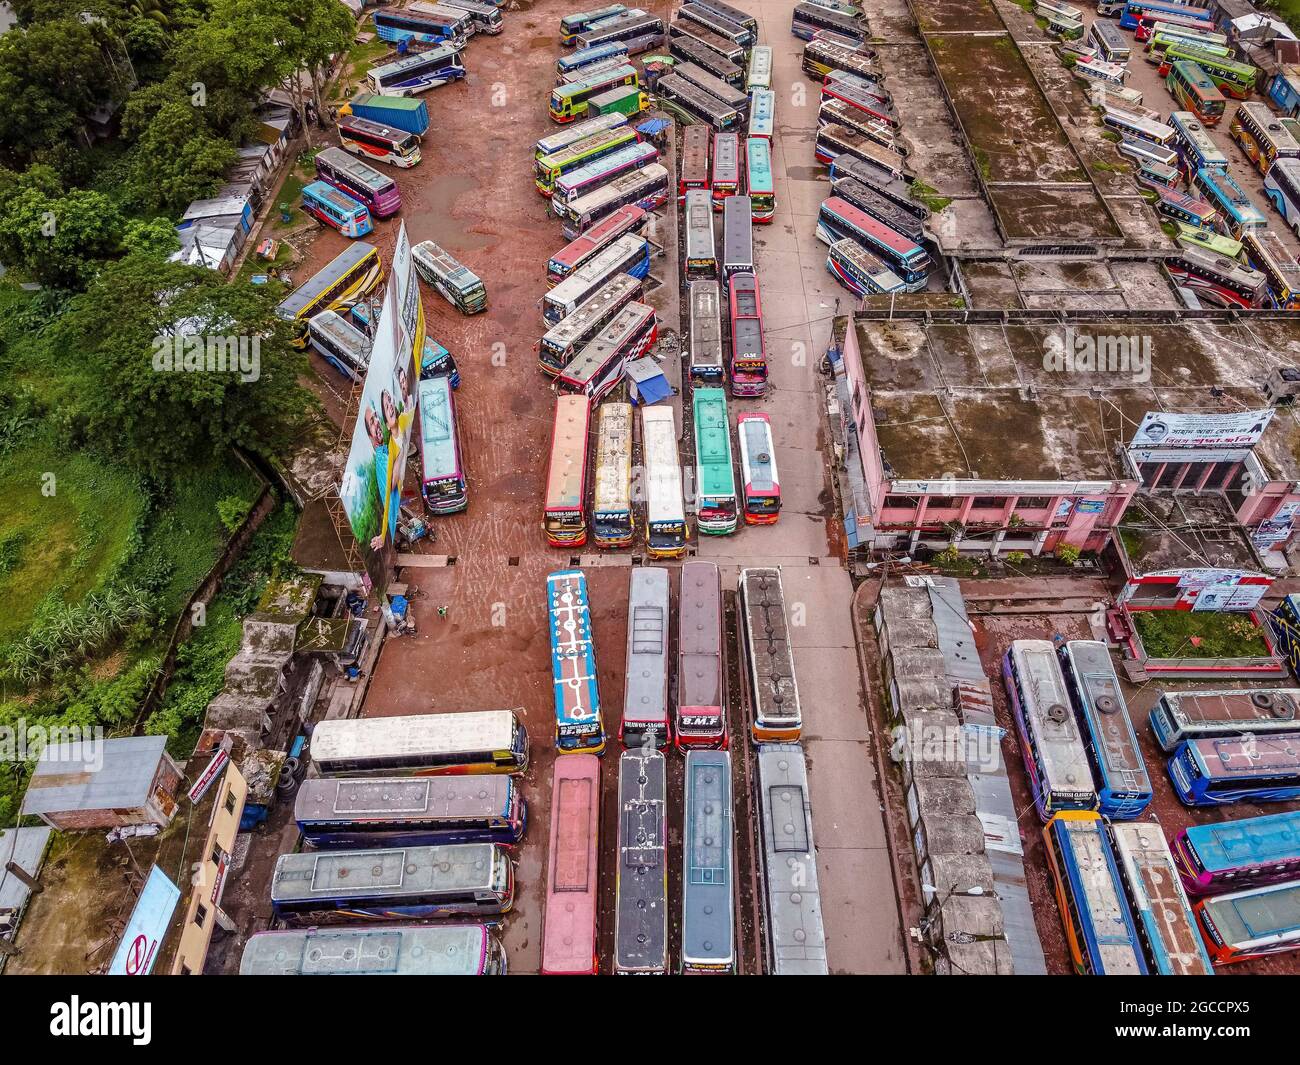 BARISHAL, BANGLADESH - AUGUST 2: Aerial view of buses line up at the Barishal Bus Stand, one of the busiest bus-stand in the south region in Bangladesh, amid lockdown week in Bangladesh during attempt to stop the spread of Covid-19 pictured on August 2, 2021 in Barishal, Bangladesh. Credit: Mustasinur Rahman Alvi/Eyepix Group/The Photo Access Stock Photo